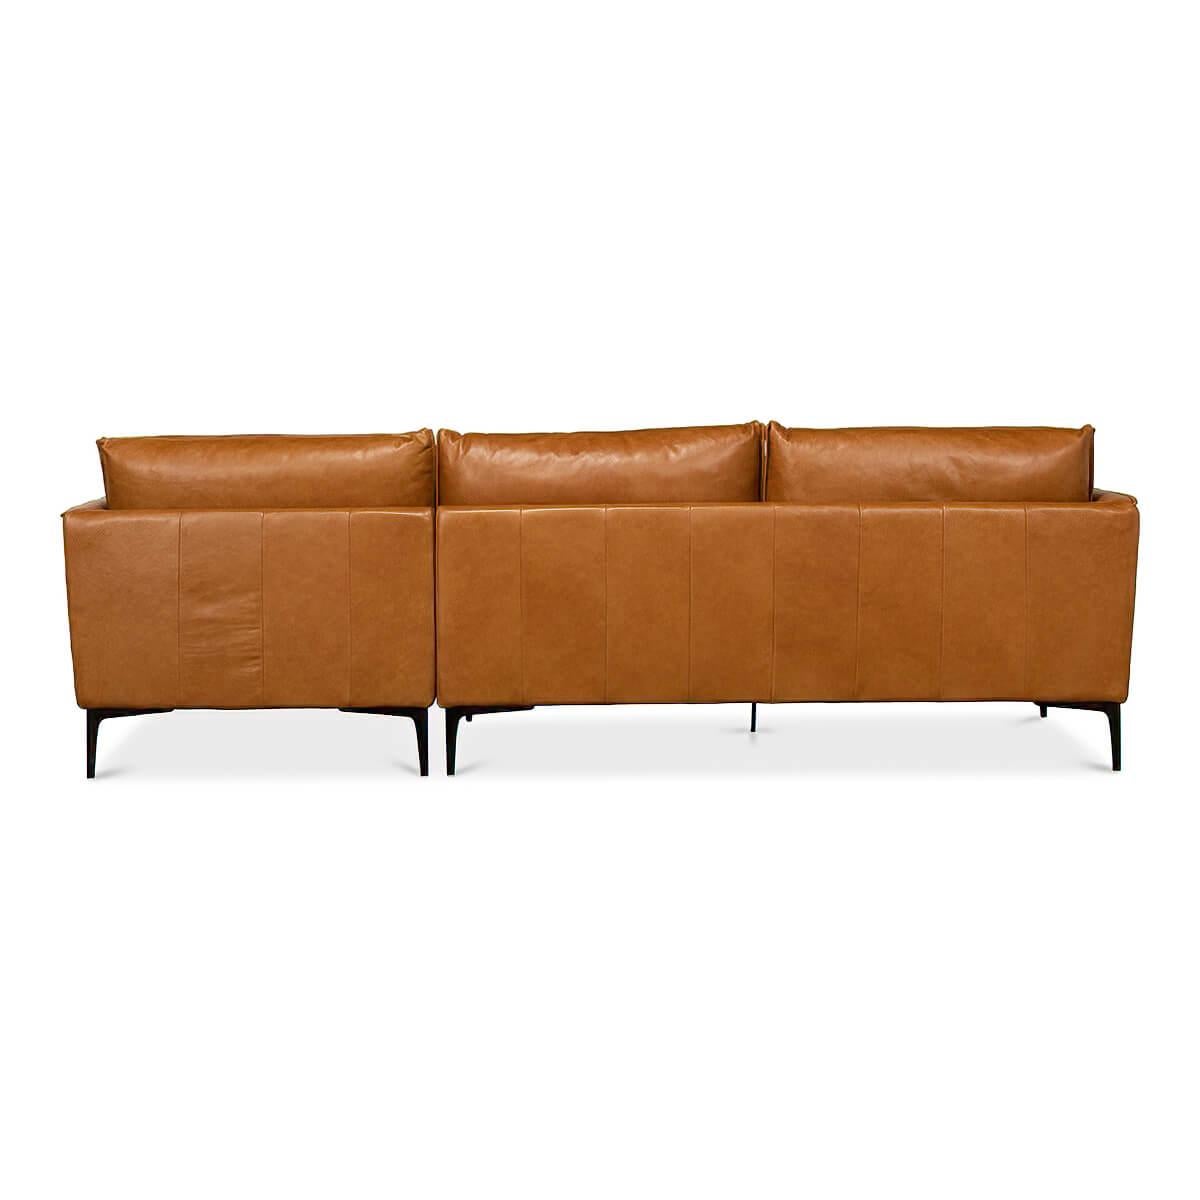 Asian Mid Century Leather Section, to the Right